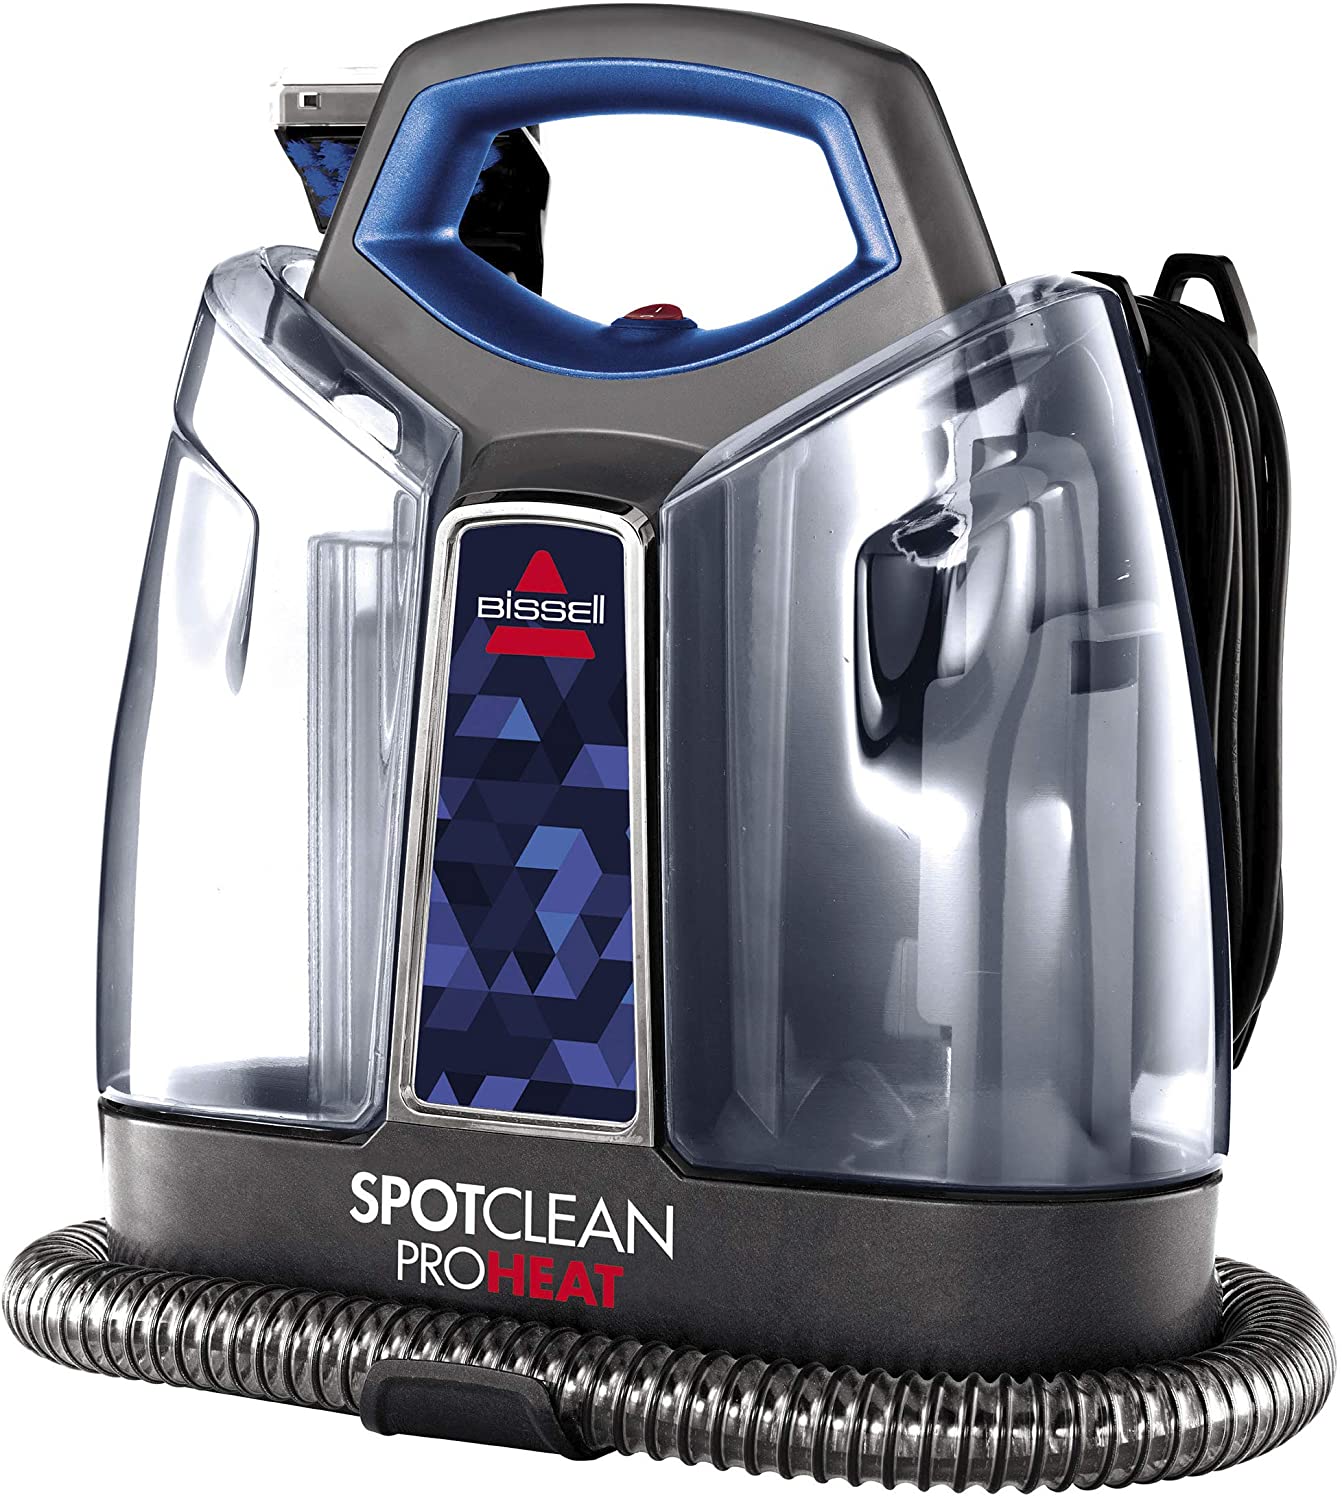 Bissell Spot Clean ProHeat Portable Carpet Cleaner